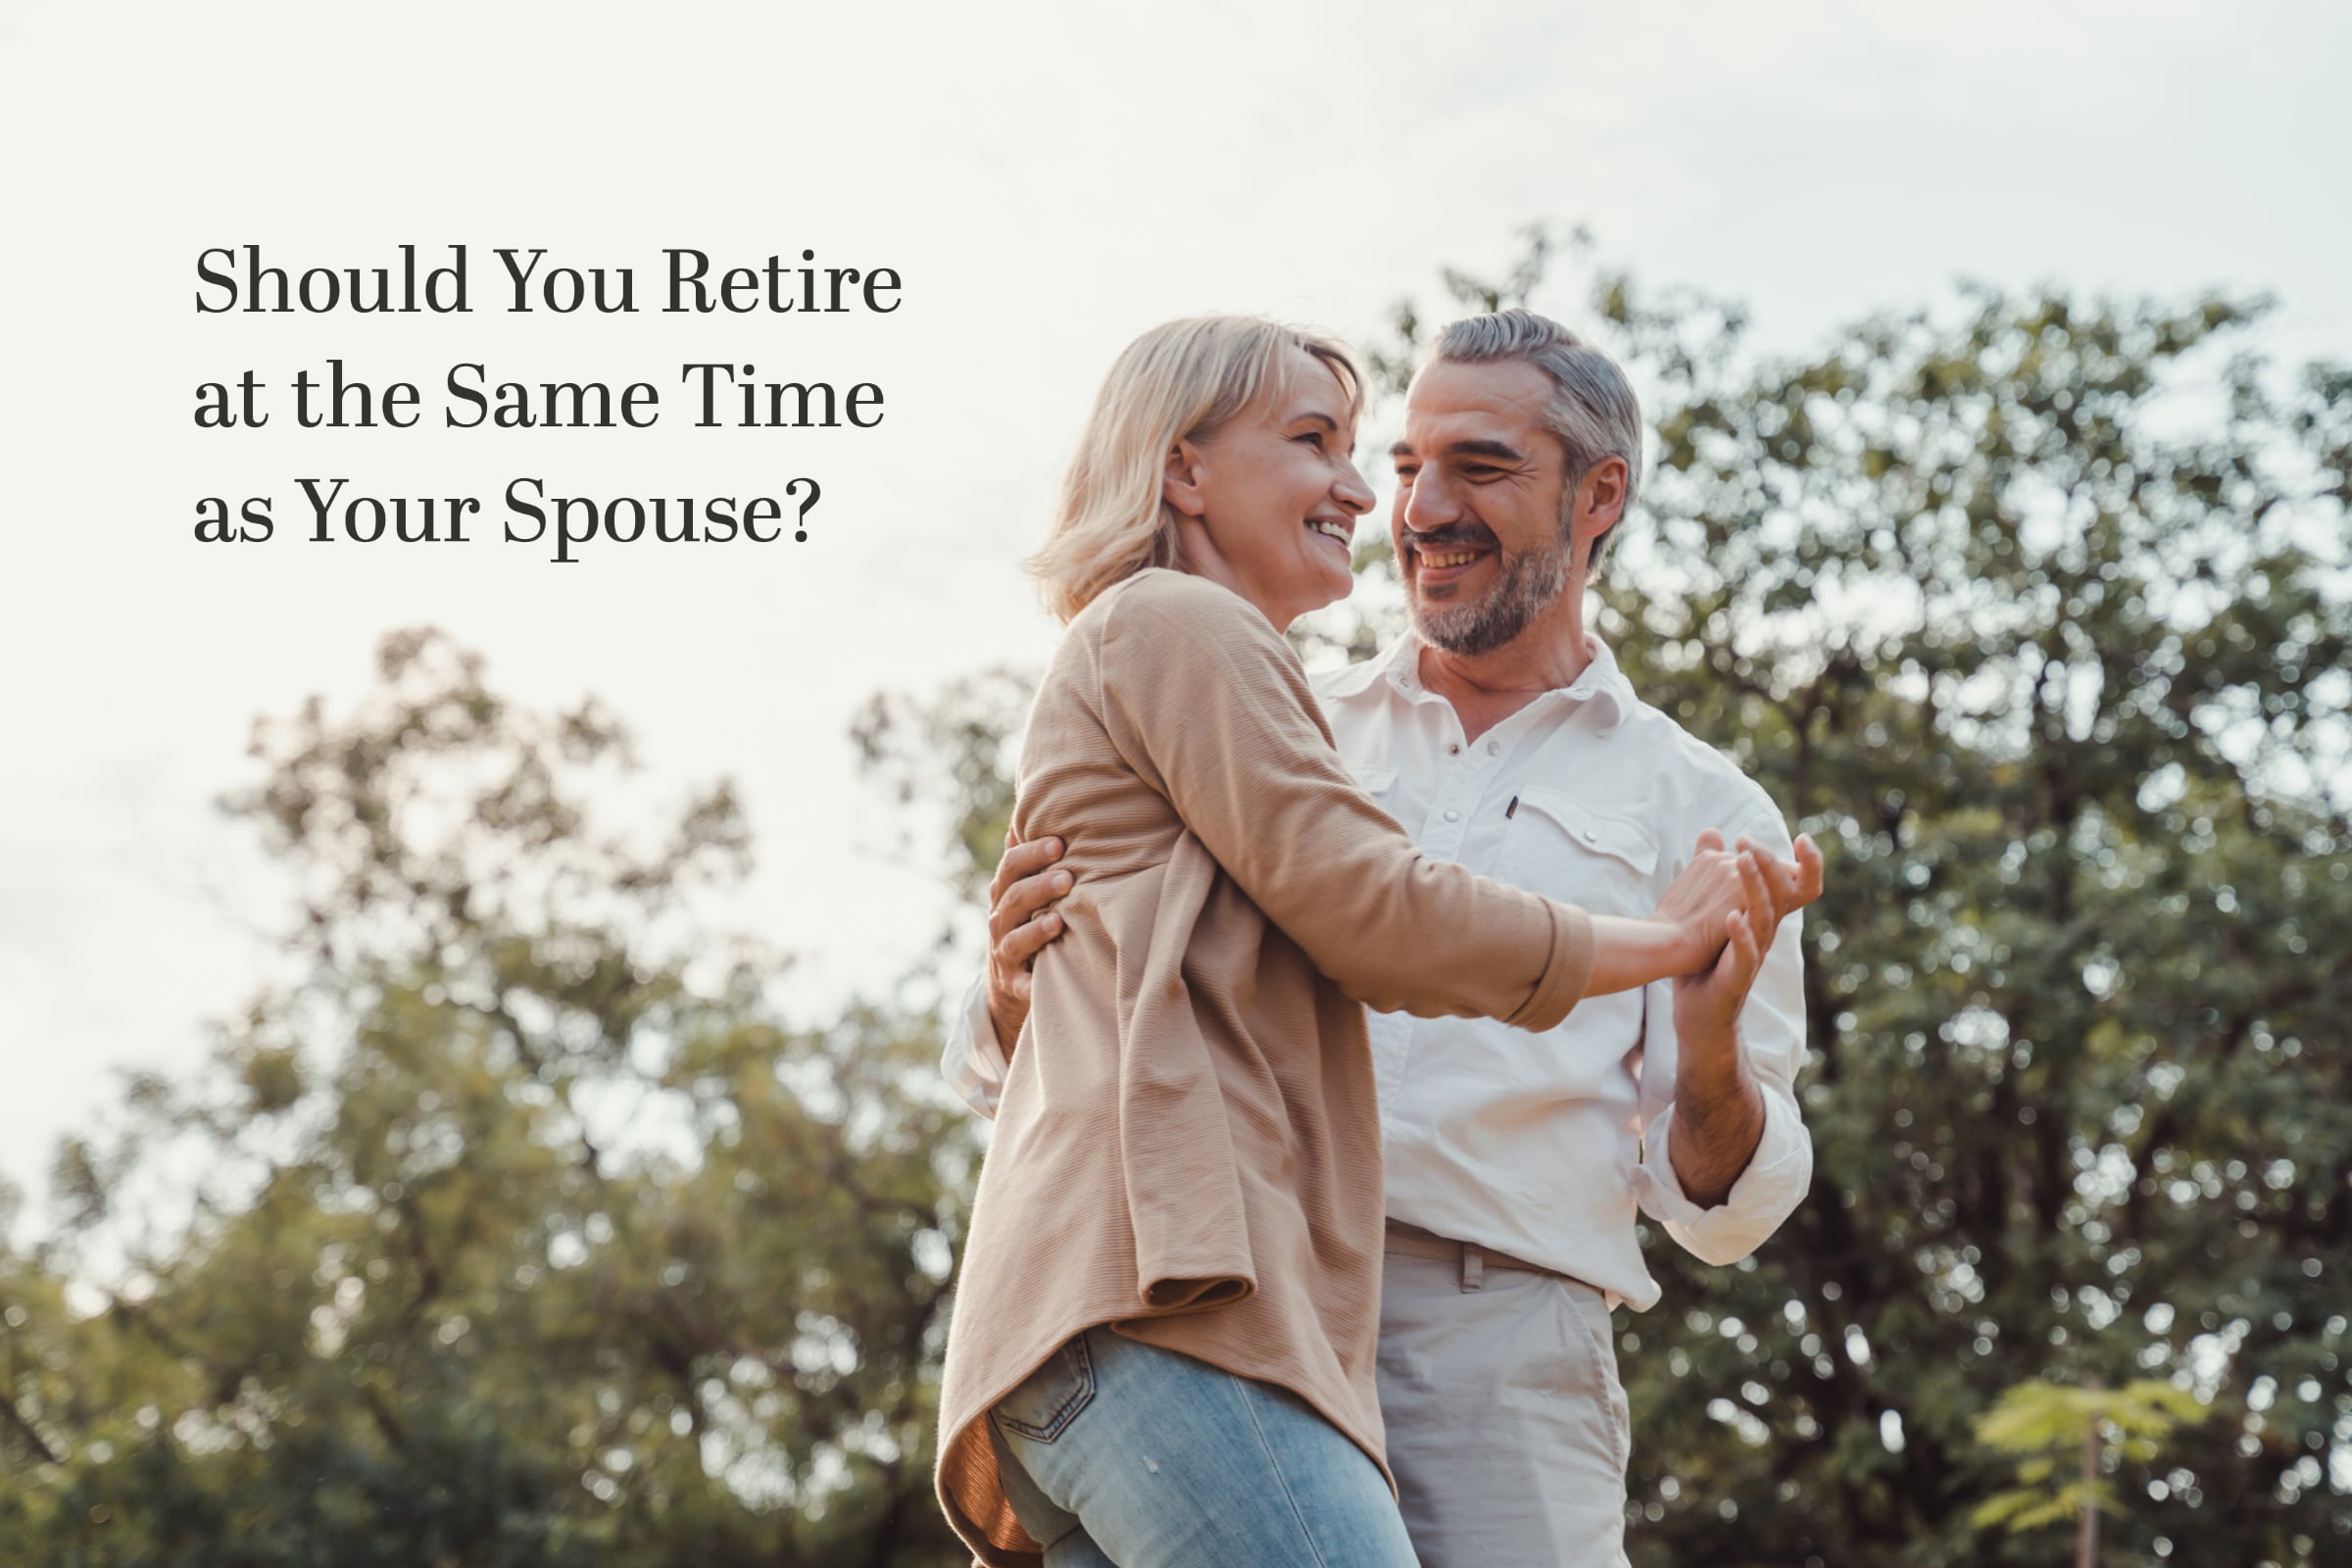 Should you retire at the same time as your spouse?